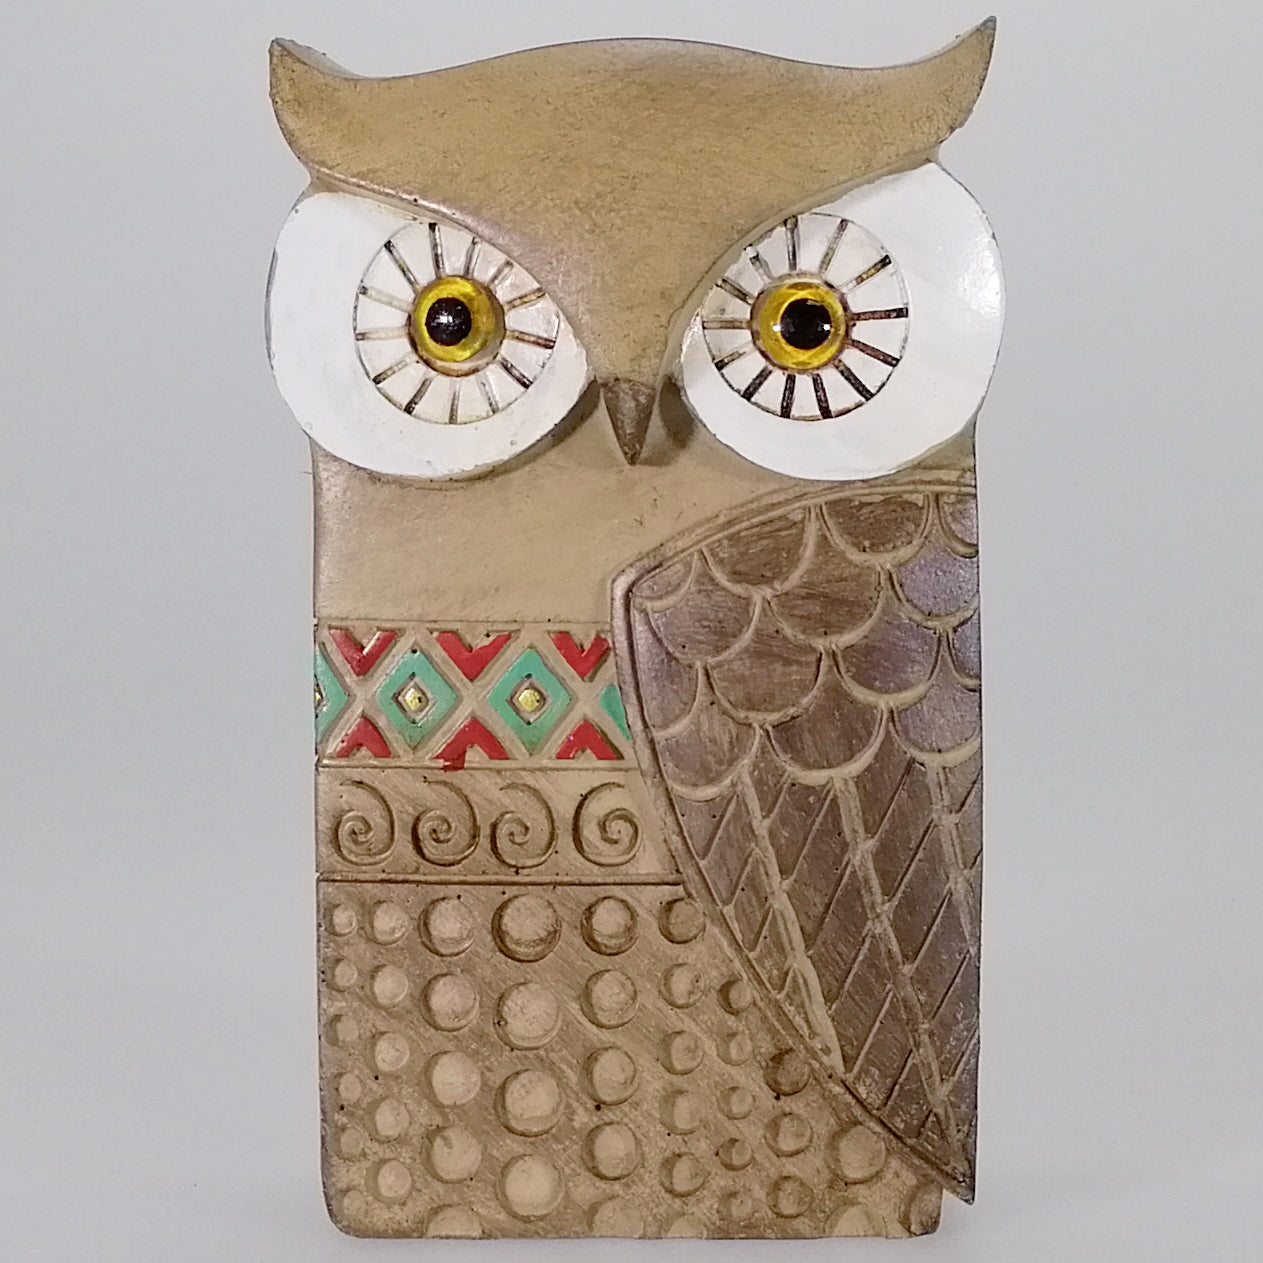 Deco Owl Carved-Look - Small